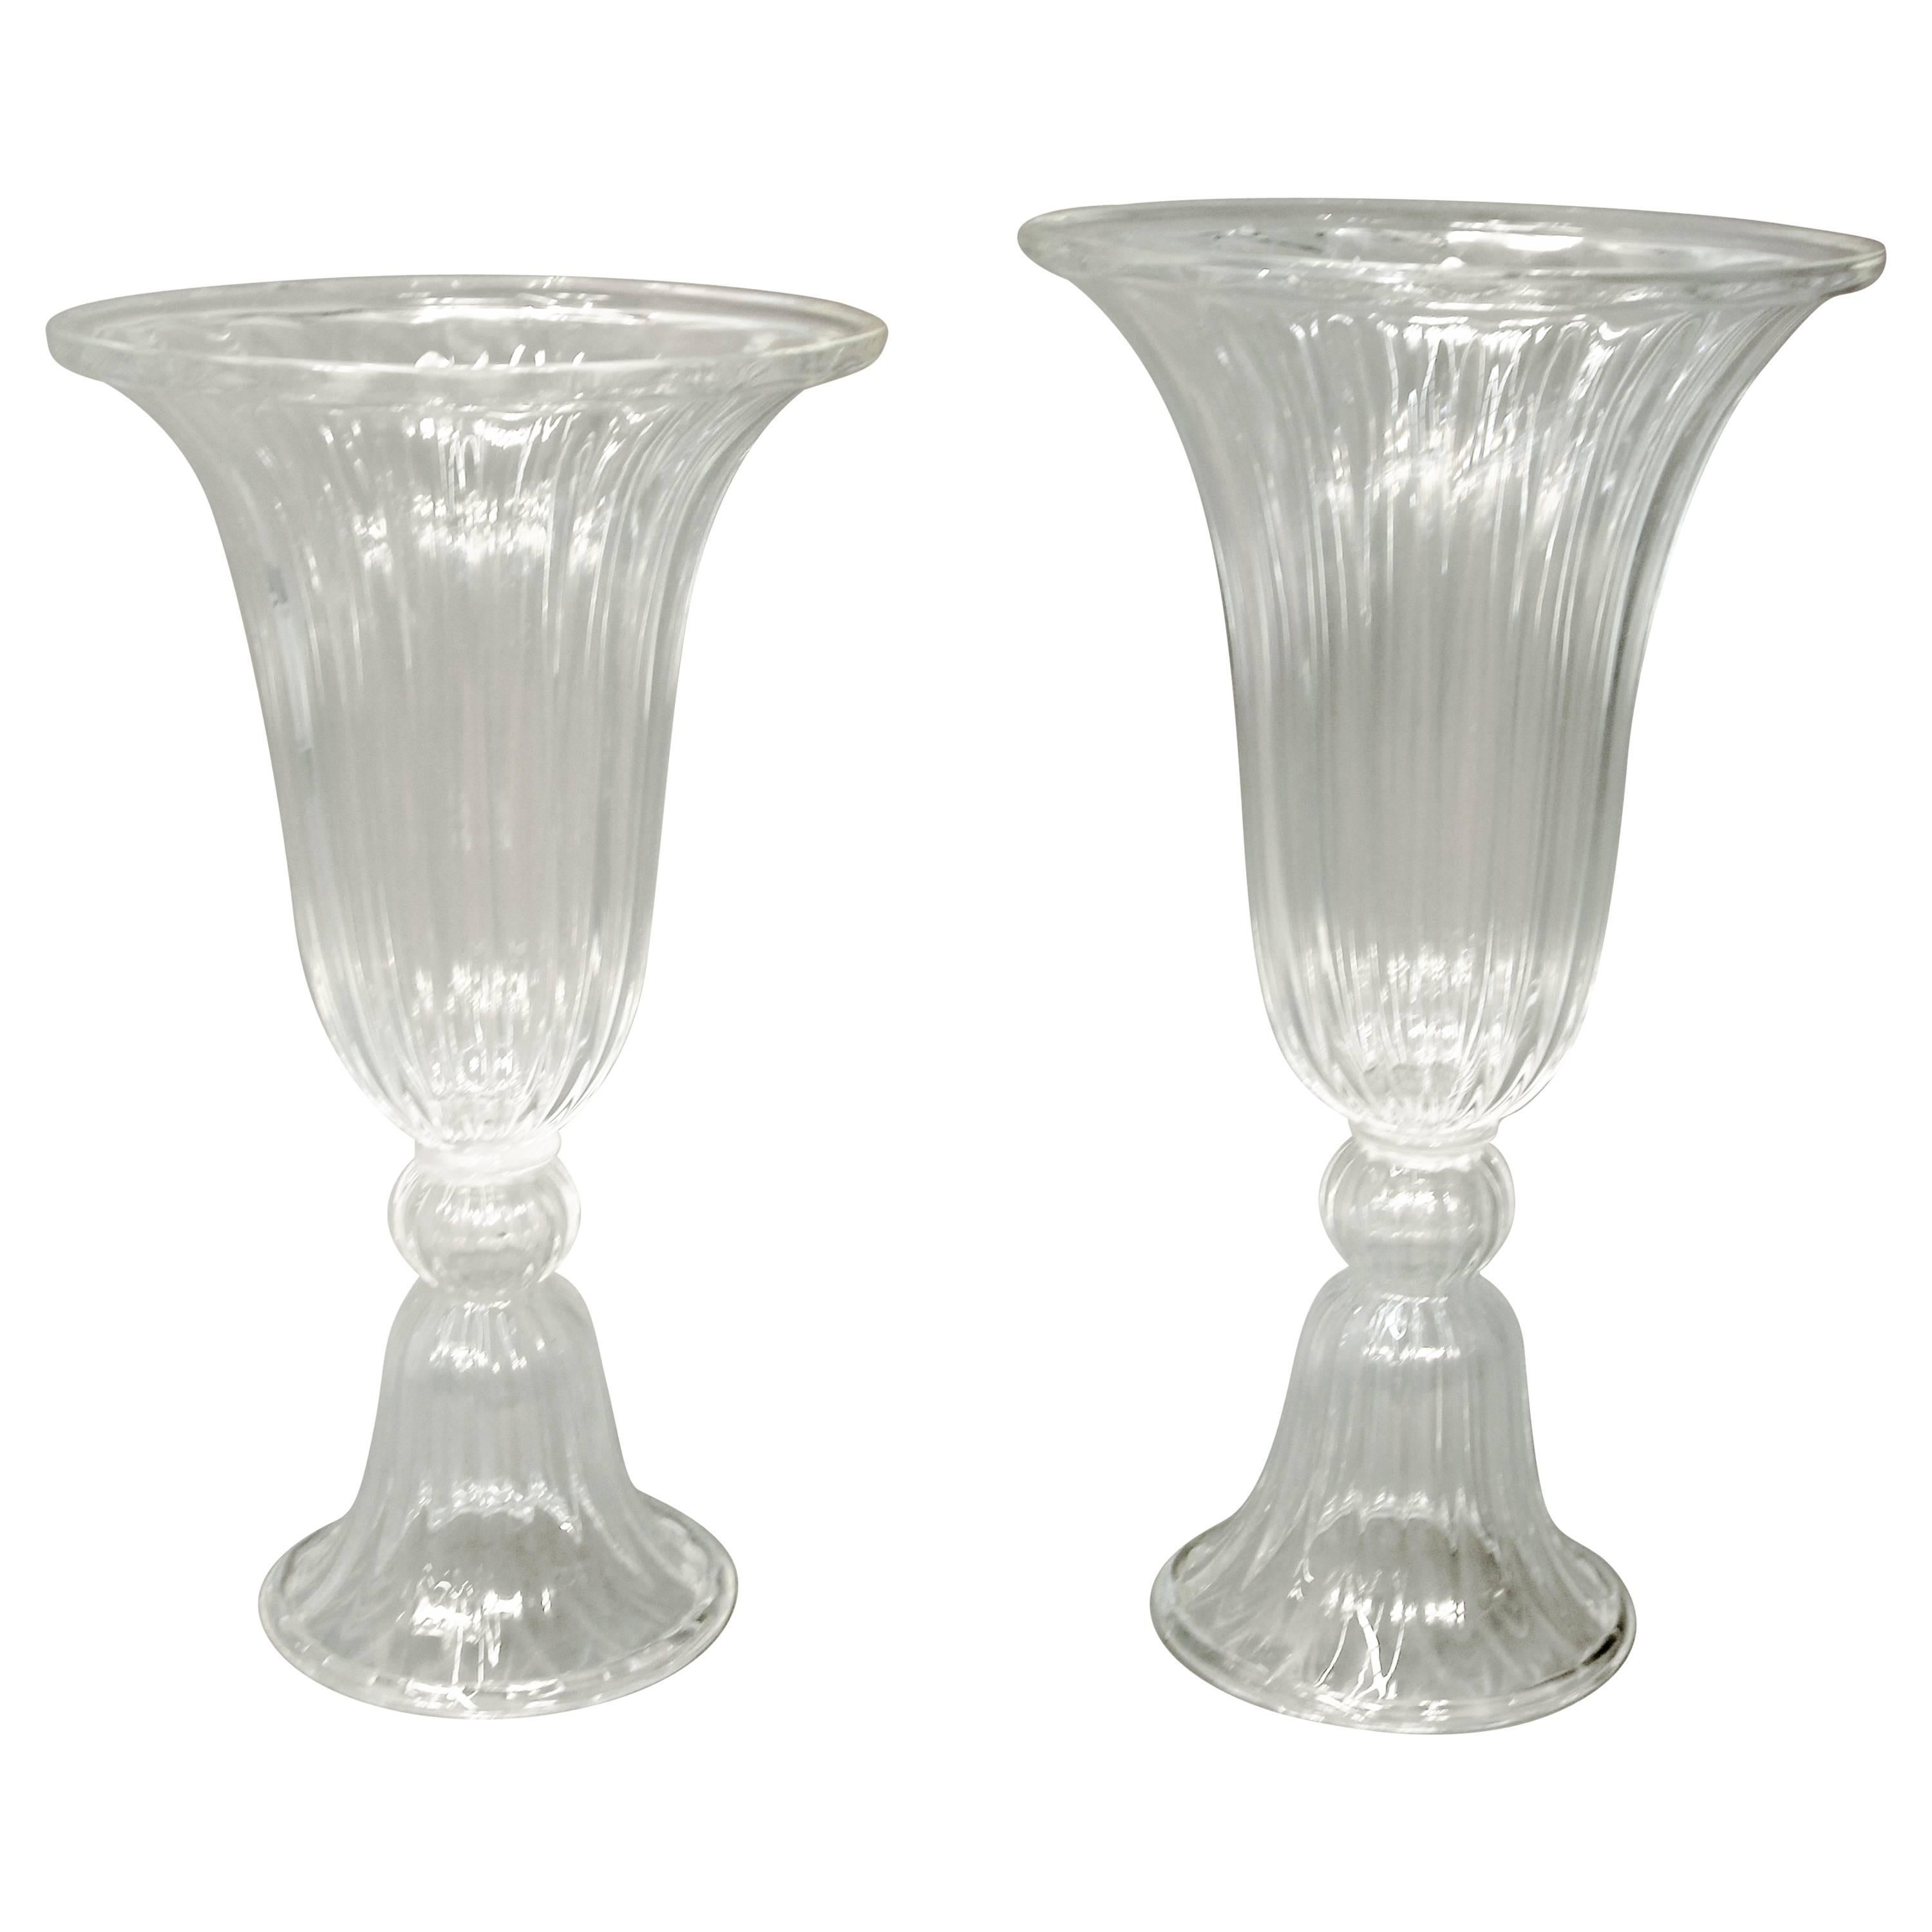 Imposing Pair of Murano Glass Vases For Sale